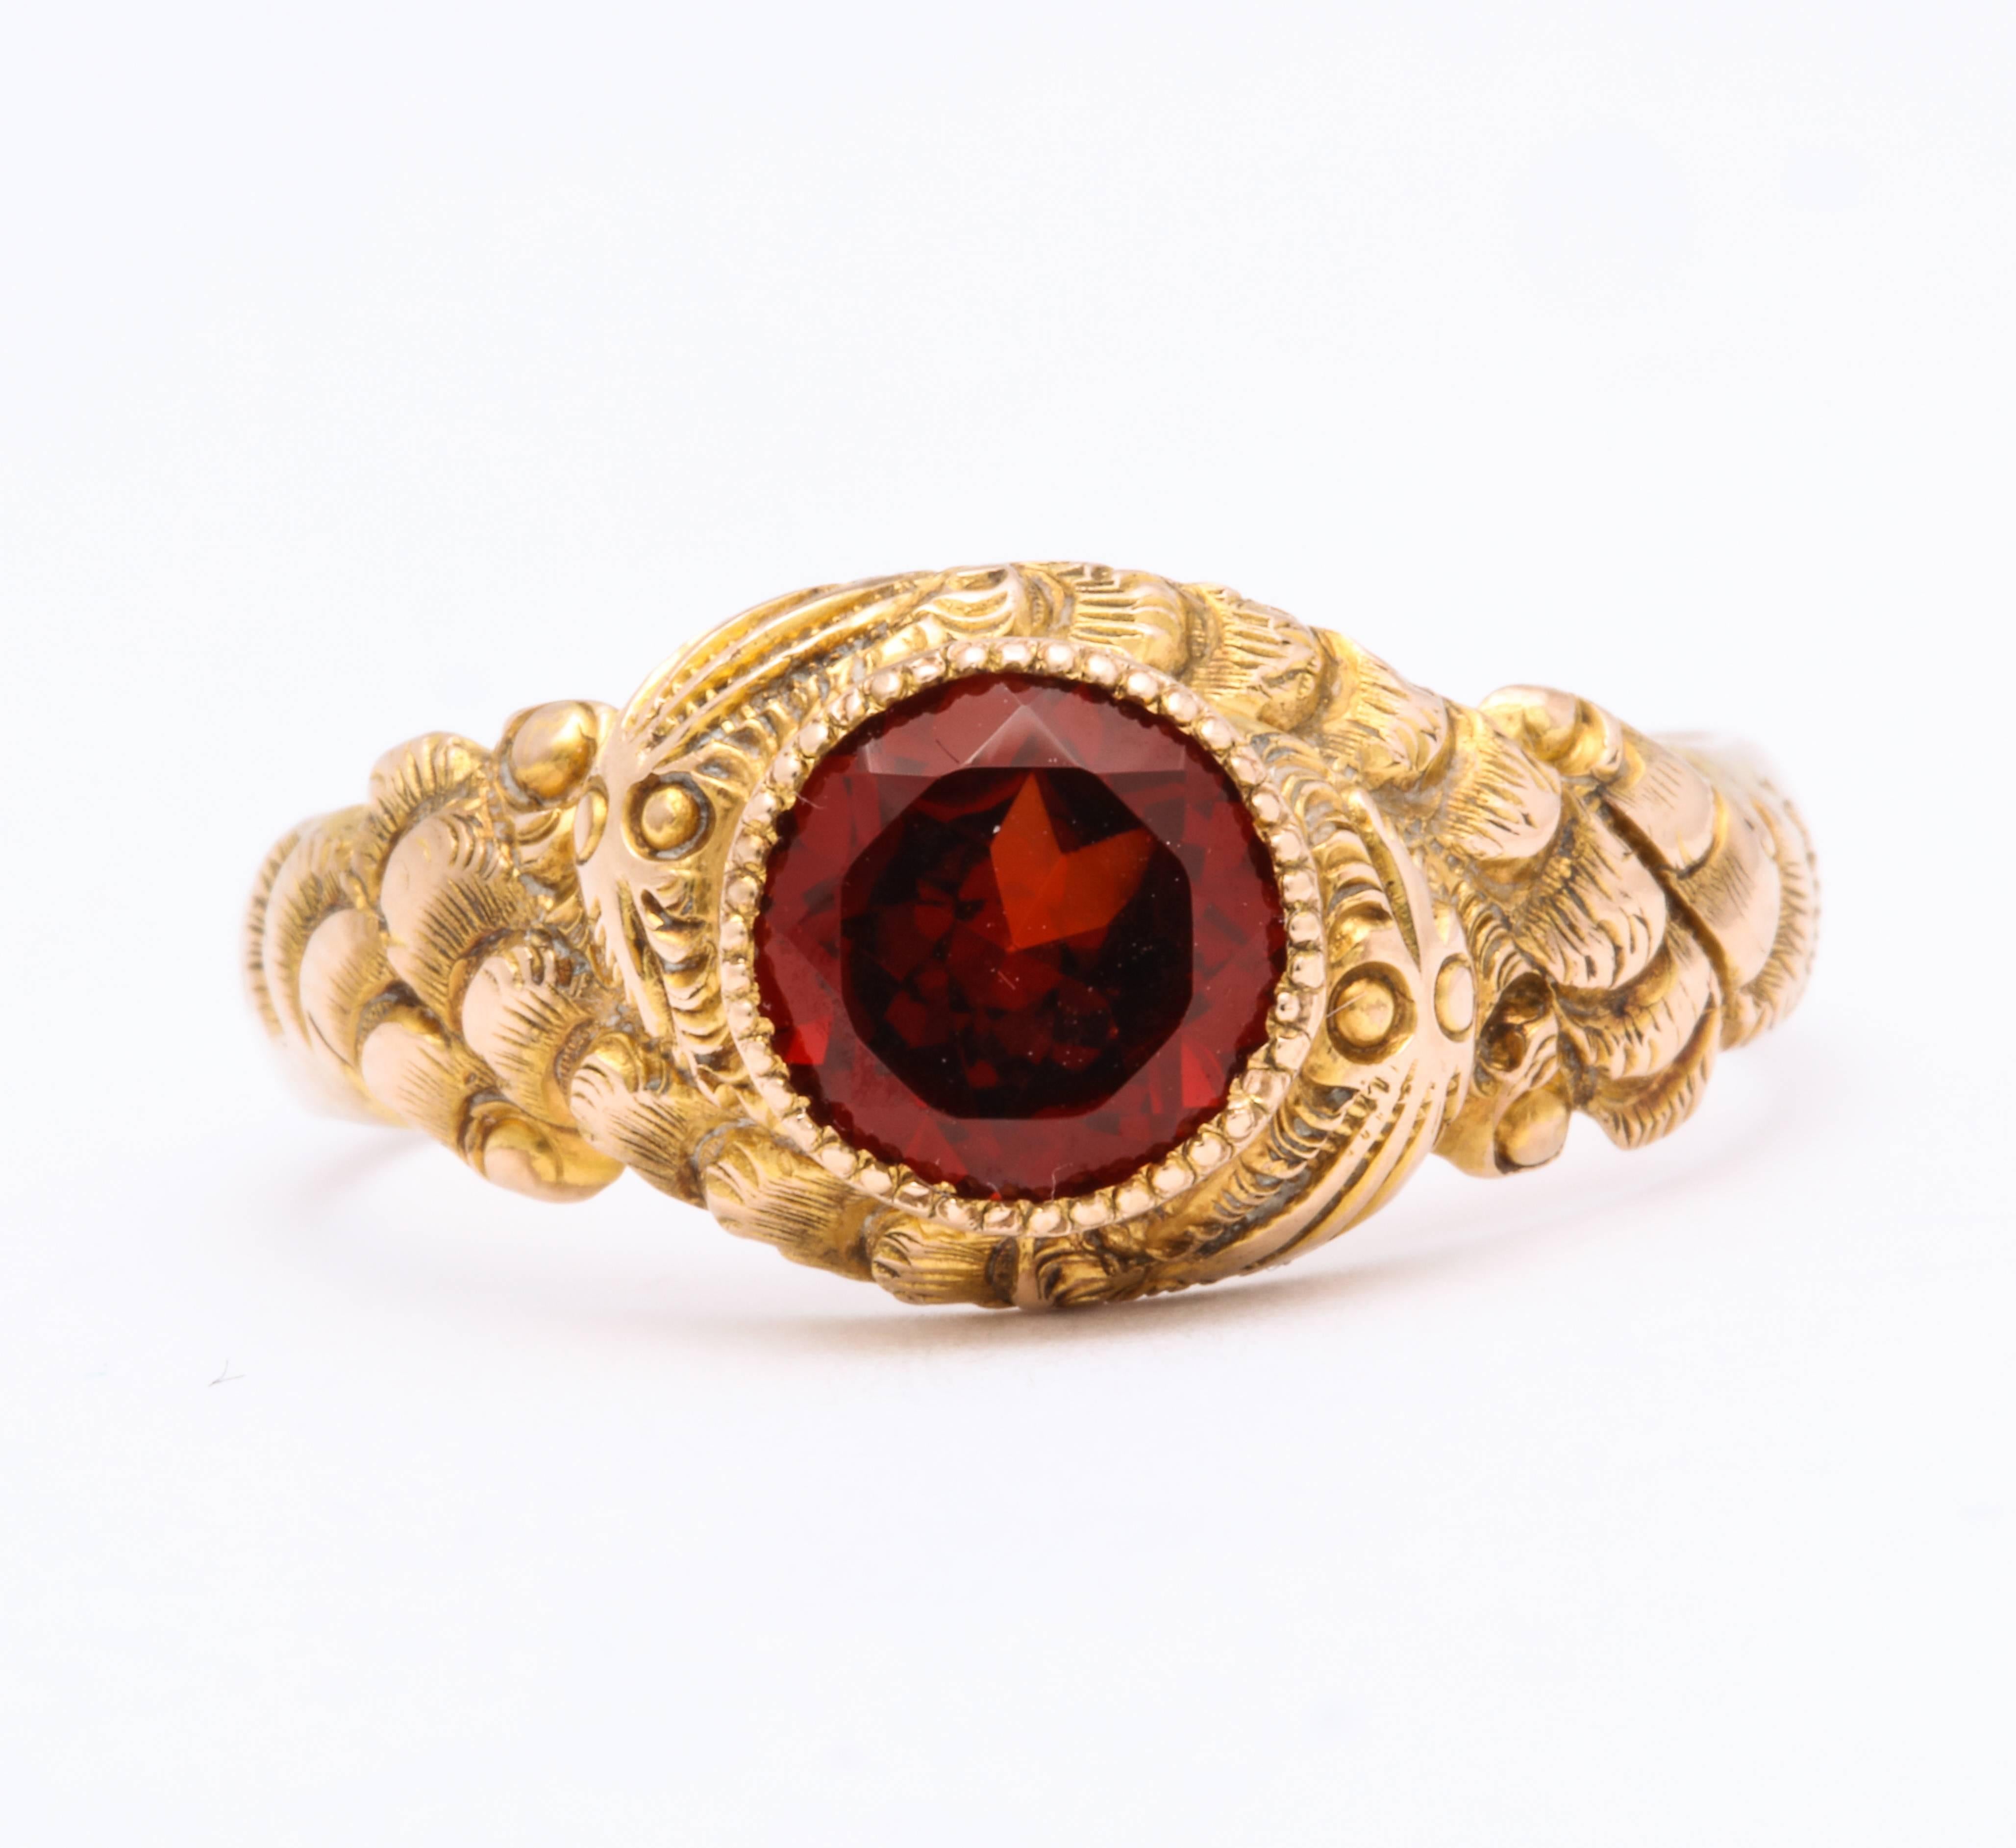 The garnet chosen for this double snake ring is a glowing, brilliant red , surrounded by two repousse engraved serpents that wrap themselves around the stone winding their way on to the substantial shank of 10 Kt gold. The entwined serpents are like